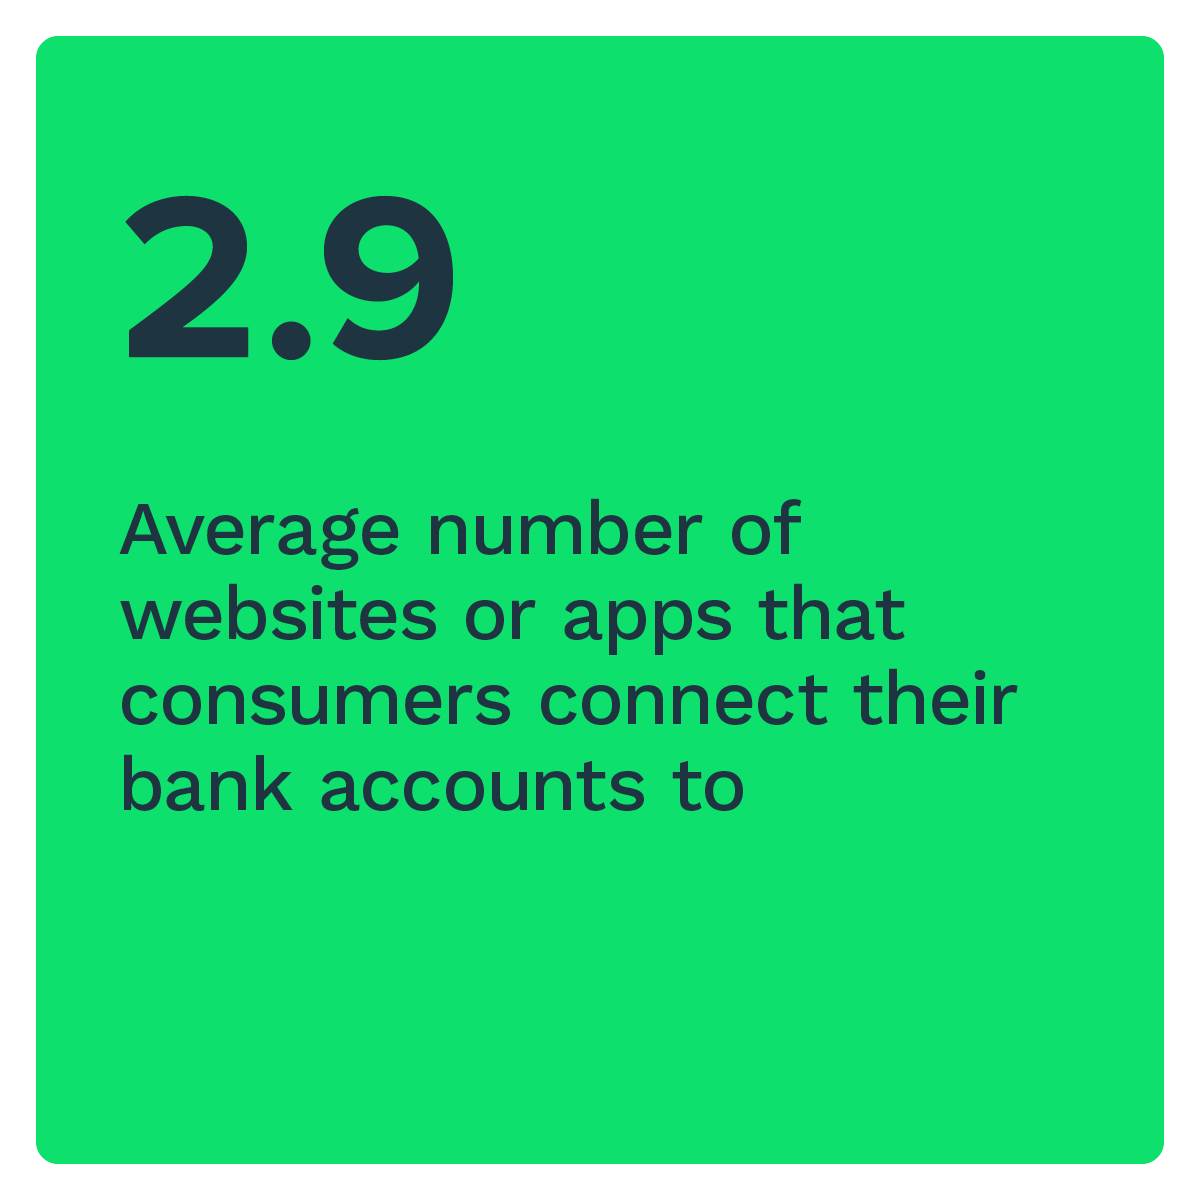 2.9: Average number of websites or apps that consumers connect their bank accounts to